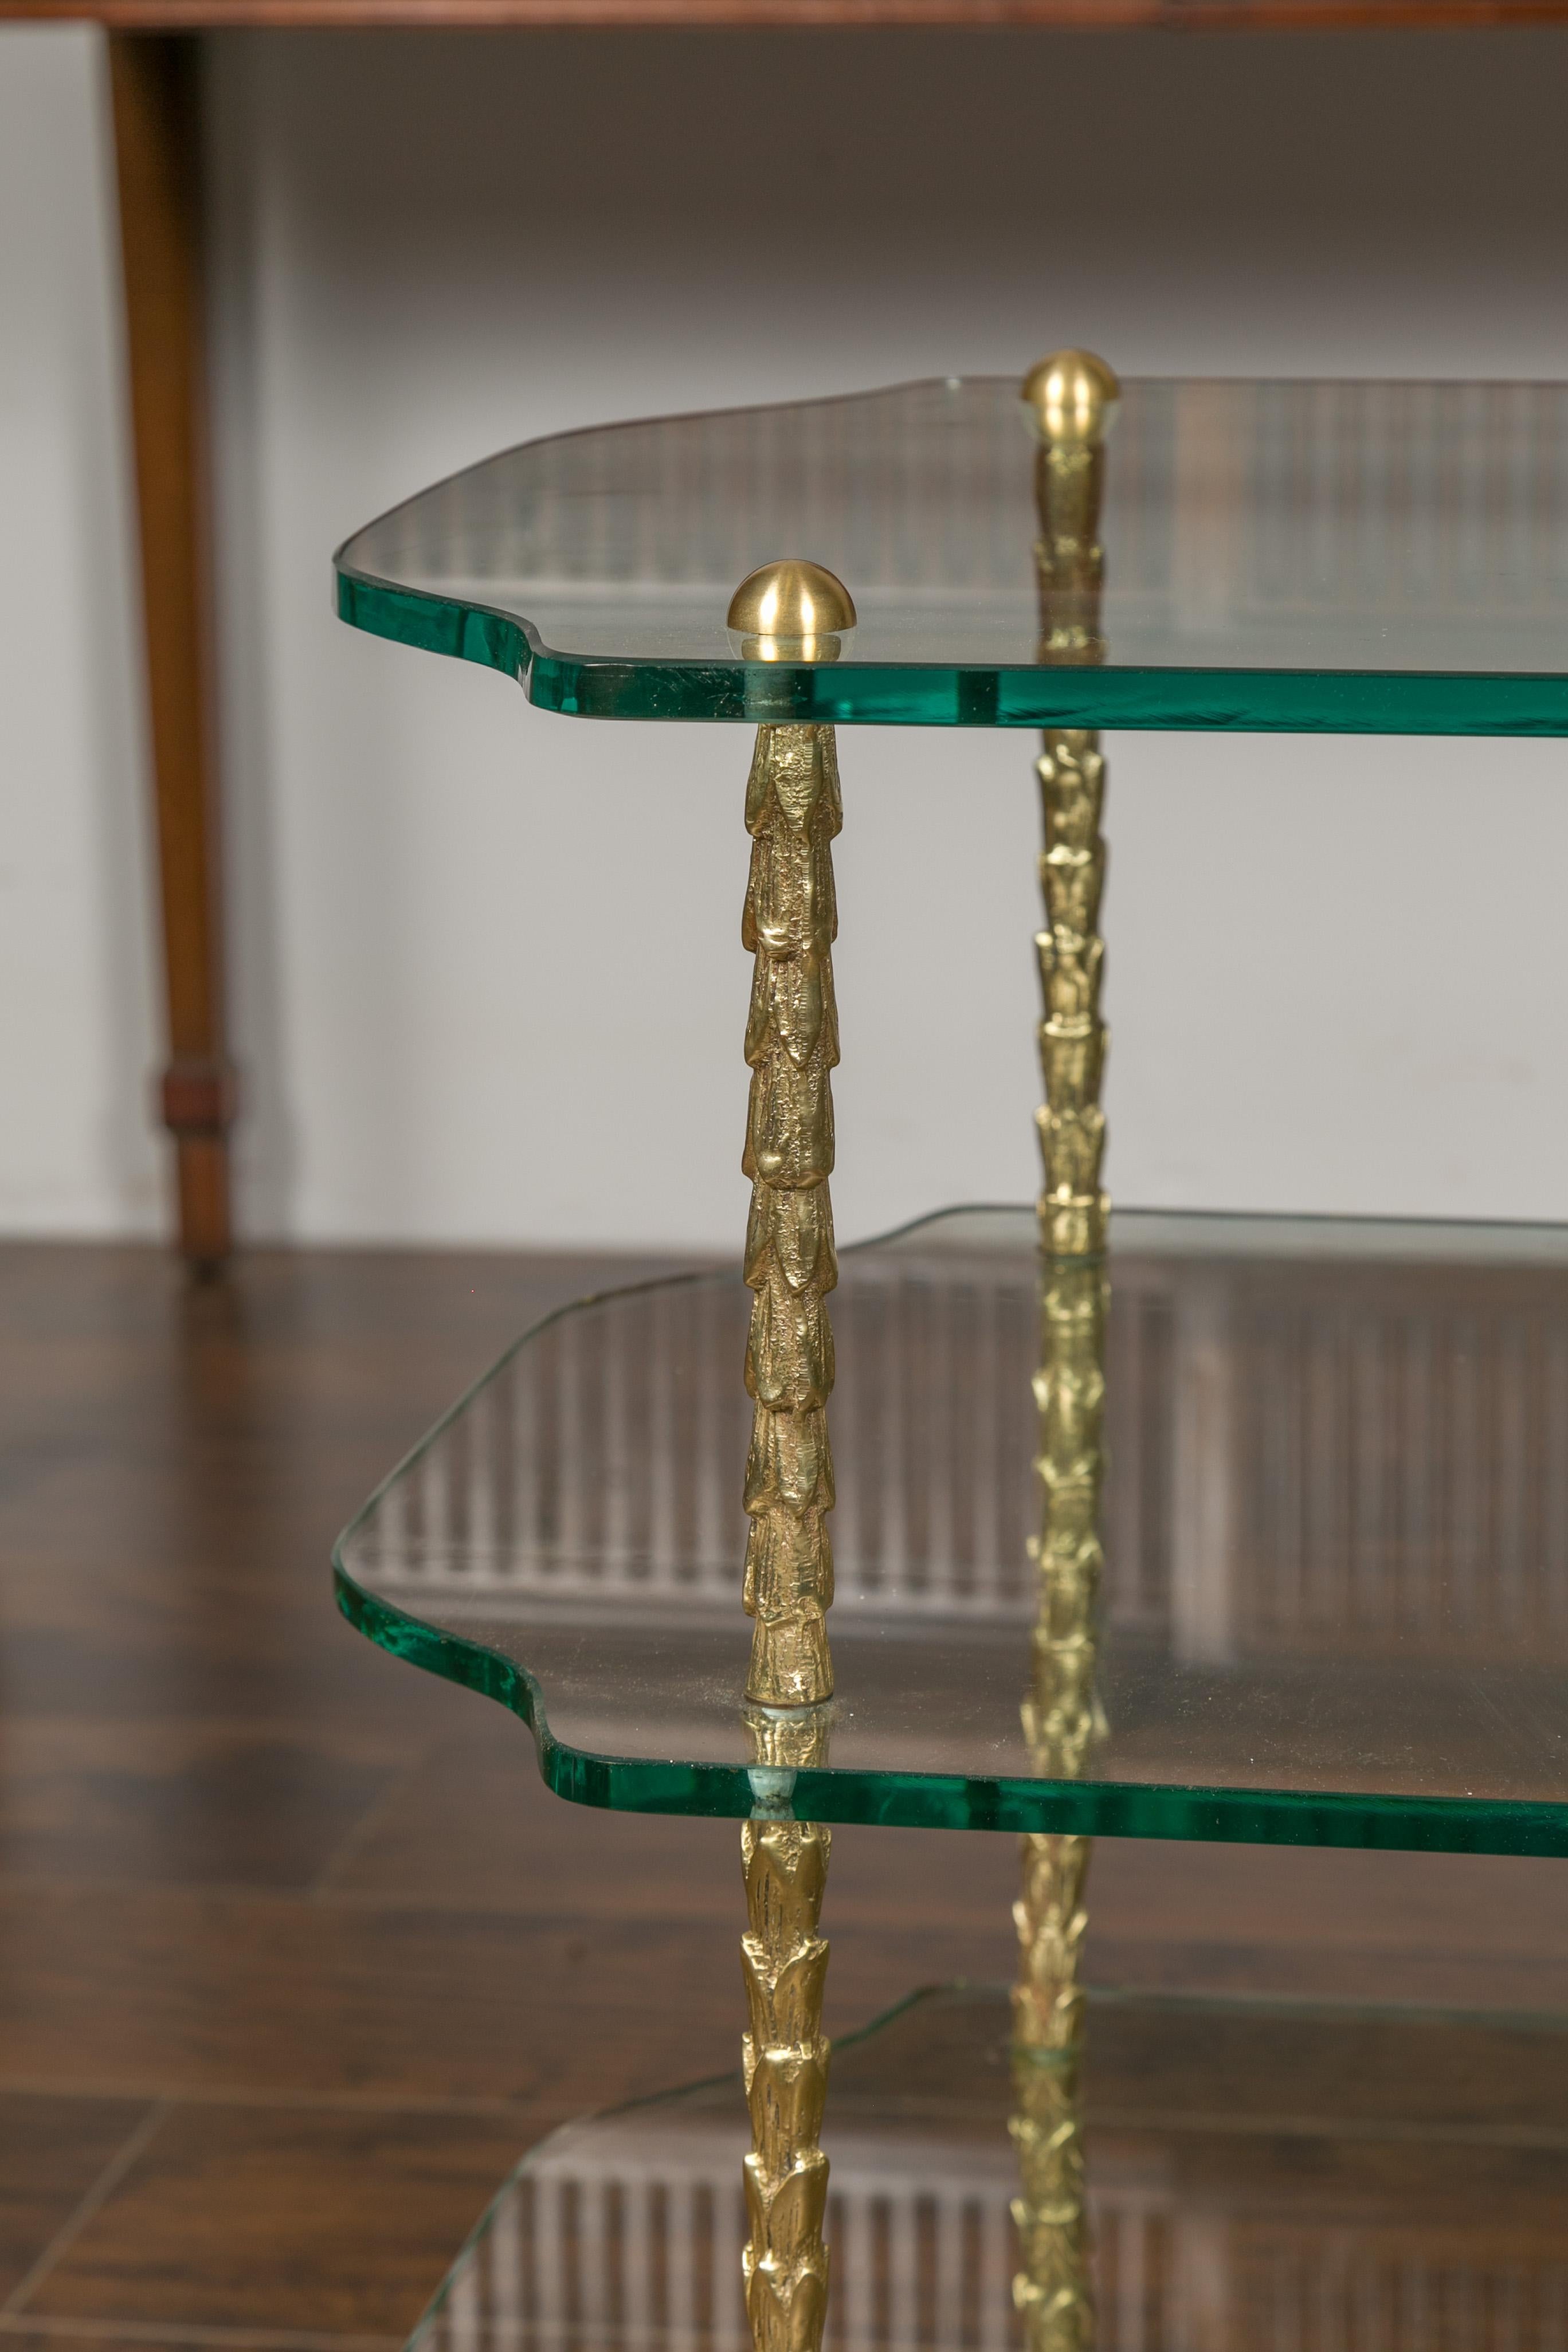 Midcentury Brass Three-Tiered Table with Glass Shelves and Foliage Motifs In Good Condition For Sale In Atlanta, GA